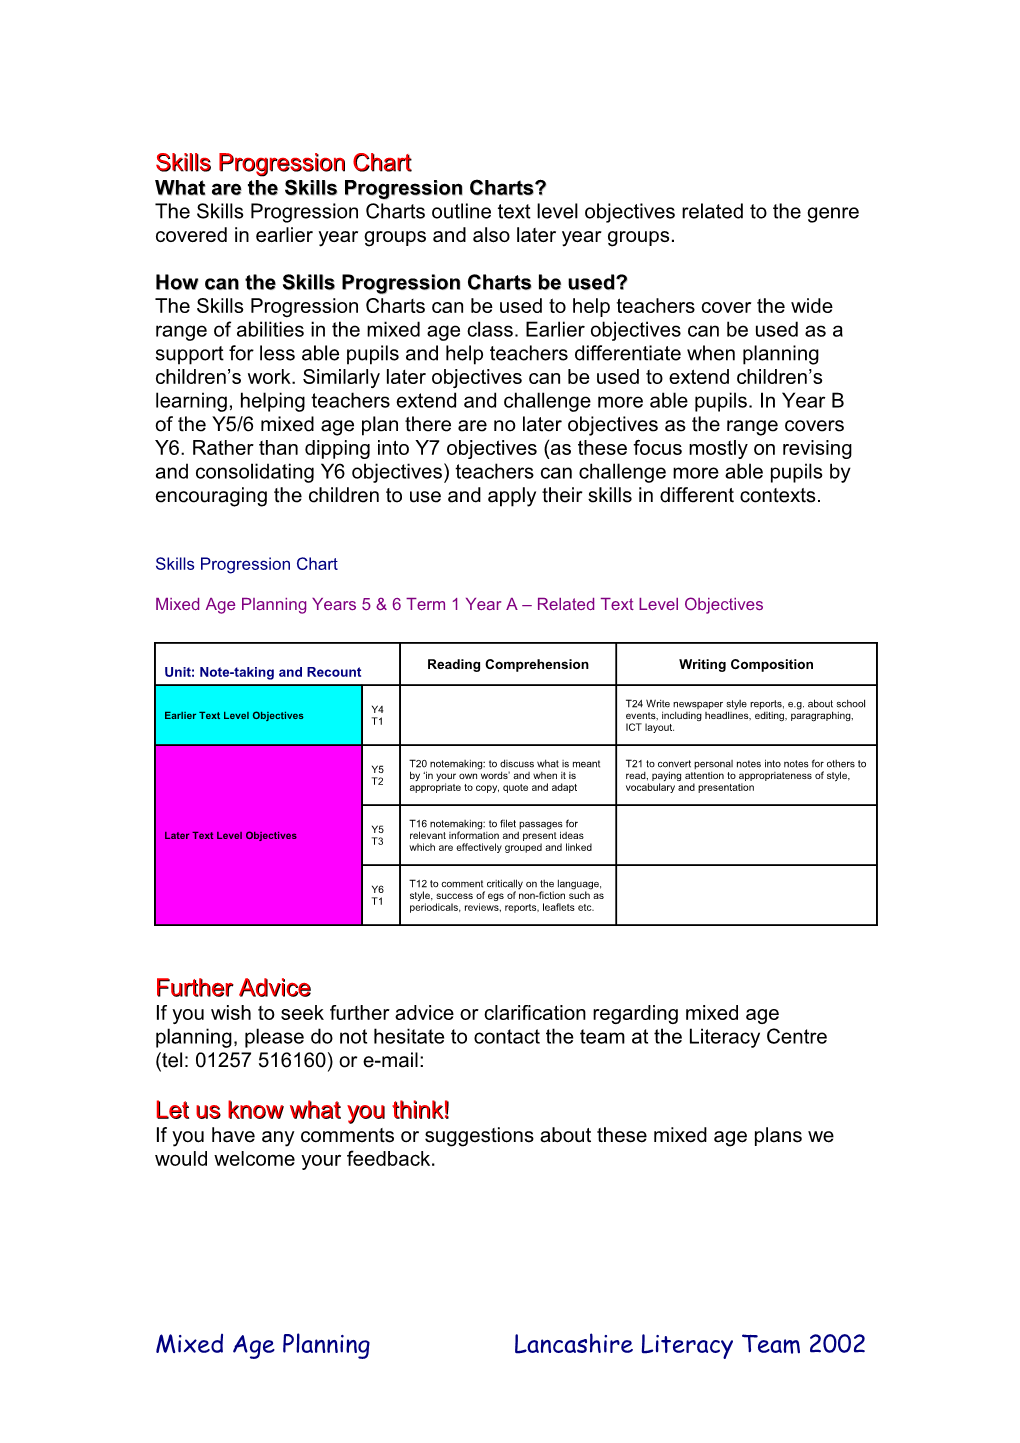 Mixed Age Planning for KS2